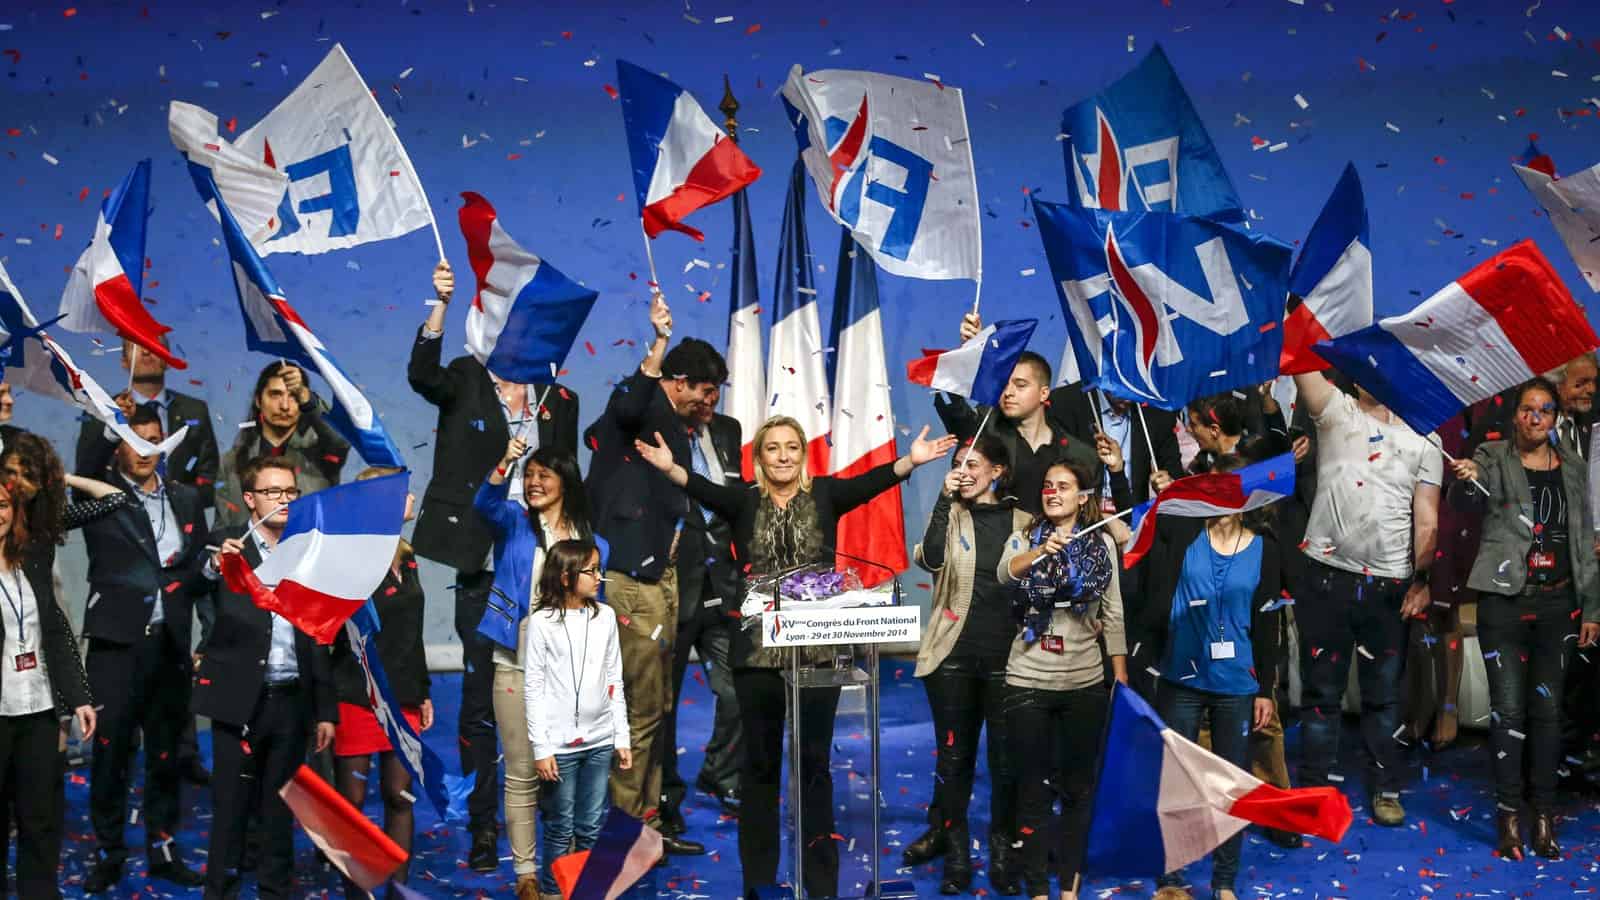 Marine Le Pen smiles after delivering a speech at the National Front Congress in Lyon, on November 30, 2014. (Robert Pratta / Reuters)